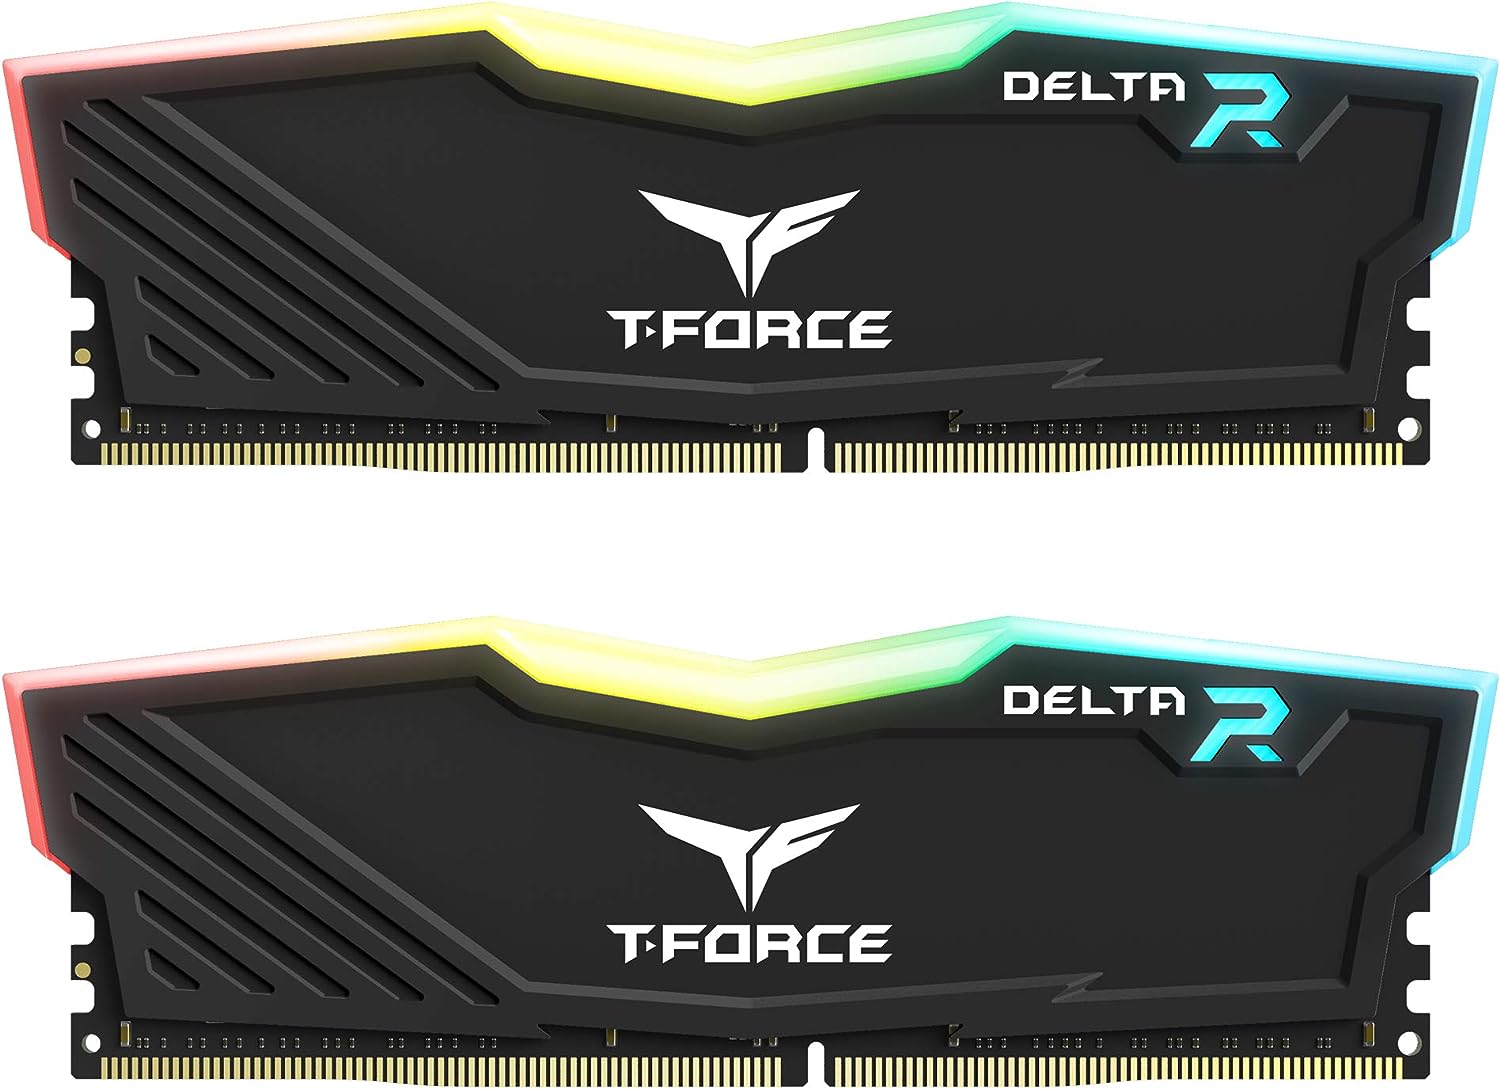 TEAMGROUP Team T-Force Delta RGB DDR4 Gaming Memory, 2 x 16 GB, 3600 Mhz, Black 0765441651753